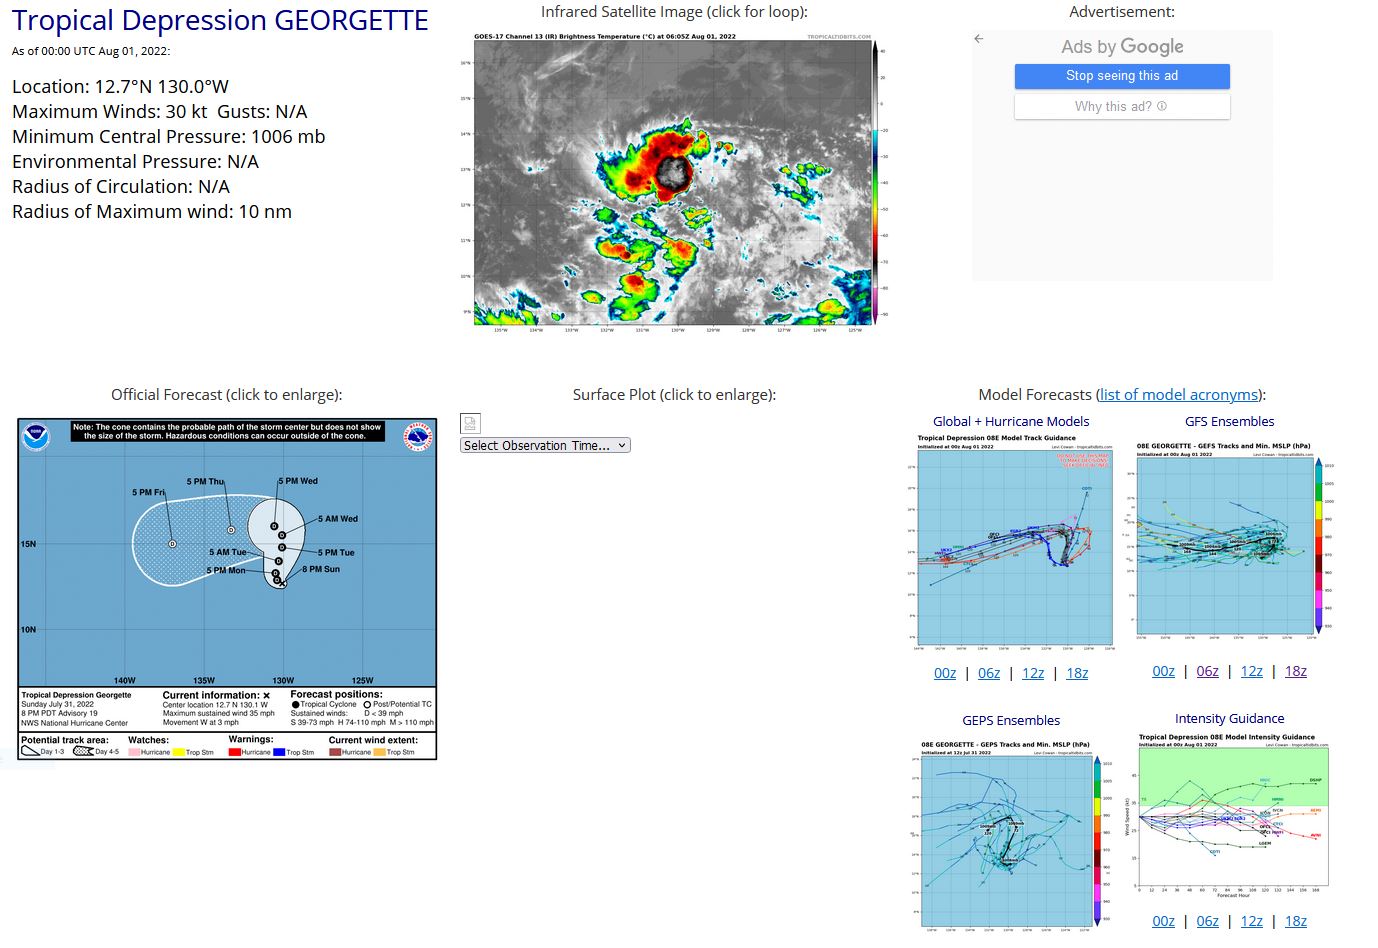 110  WTPZ43 KNHC 010235 TCDEP3  Tropical Depression Georgette Discussion Number  19 NWS National Hurricane Center Miami FL       EP082022 800 PM PDT Sun Jul 31 2022  Almost all deep convection has collapsed near the center of Georgette.  Last-light visible imagery showed an exposed low-level circulation and satellite water vapor imagery indicates the presence of dry air near the inner core of the storm.  Subjective  Dvorak intensity estimates from TAFB and SAB range between 35-25  kt.  The initial intensity is held at 30 kt to represent a blend  of the classifications.  Georgette is drifting westward at 3 kt, to the south of a weak  mid-level ridge.  The tropical depression is expected to turn  northward at a break in the ridge, though models disagree on the  timing of the turn and this has created a large spread amongst the  track guidance.  However, most models do show the ridge  restrengthening by mid-week and steering Georgette westward to  west-southward through the end of the forecast period.  The official  track forecast is similar to the previous advisory track prediction  and closest to the model consensus aid, TVCE.  Moderate-to-strong easterly vertical wind shear caused by the  outflow from Frank is expected to continue over Georgette for the  next couple of days.  This combined with the dry mid-tropospheric  relative humidities around the cyclone will likely prevent  Georgette from restrengthening.  The NHC intensity forecast shows  Georgette maintaining tropical depression strength until day 4, when  it is predicted to become a post-tropical remnant low.  Though, if  deep convection does not reform near the center, this could happen  even sooner.